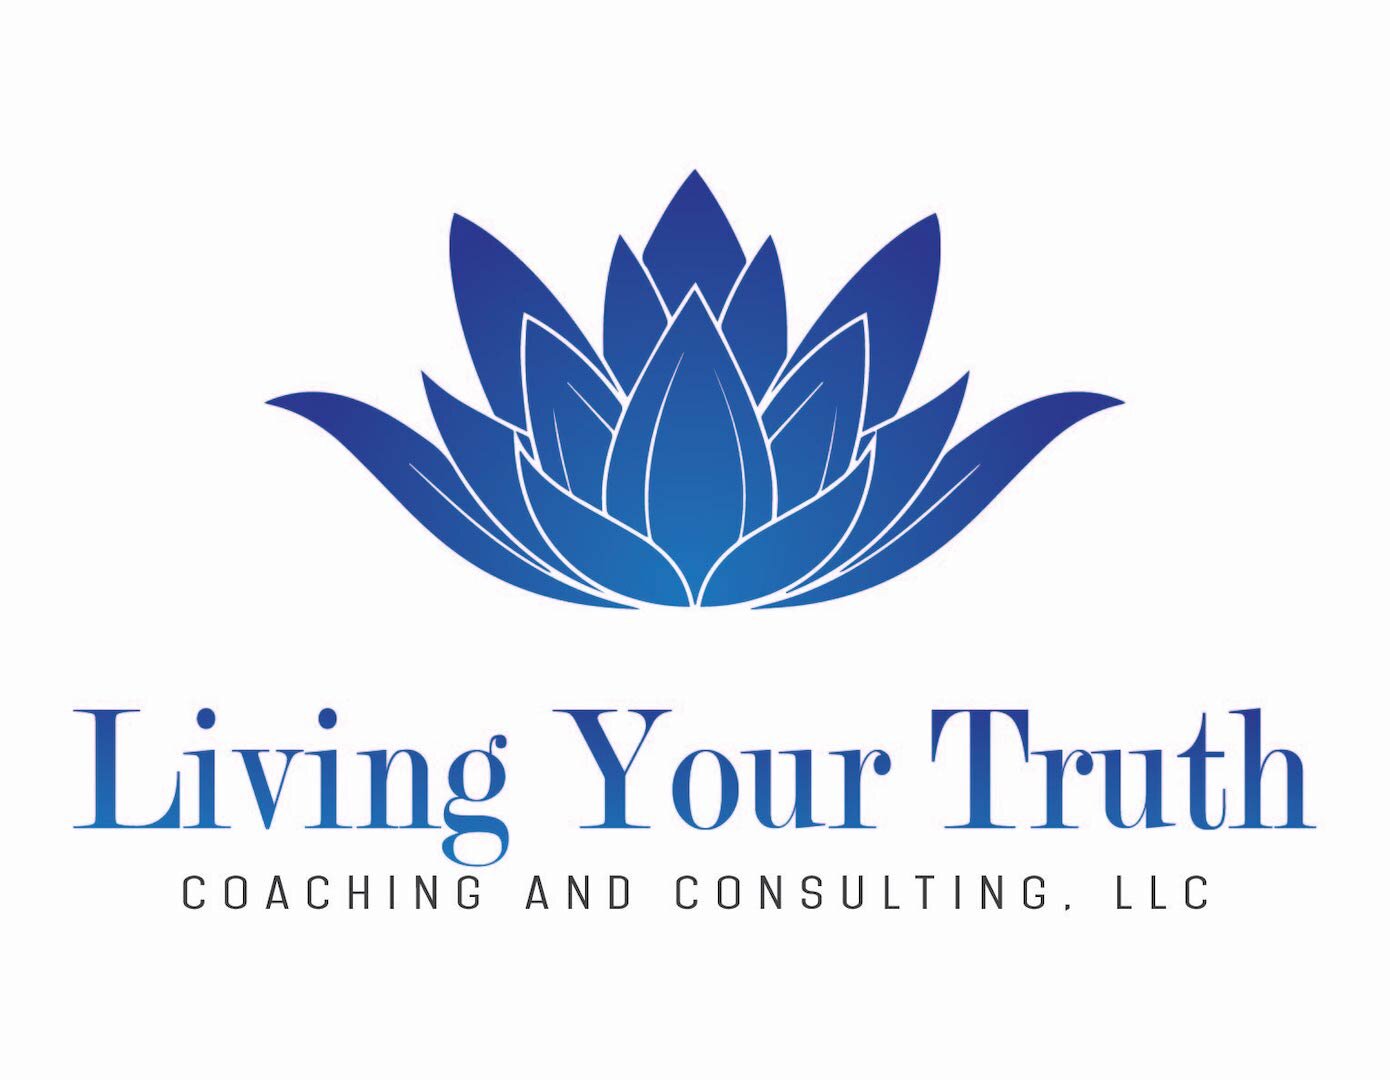 Living Your Truth Coaching and Consulting, LLC